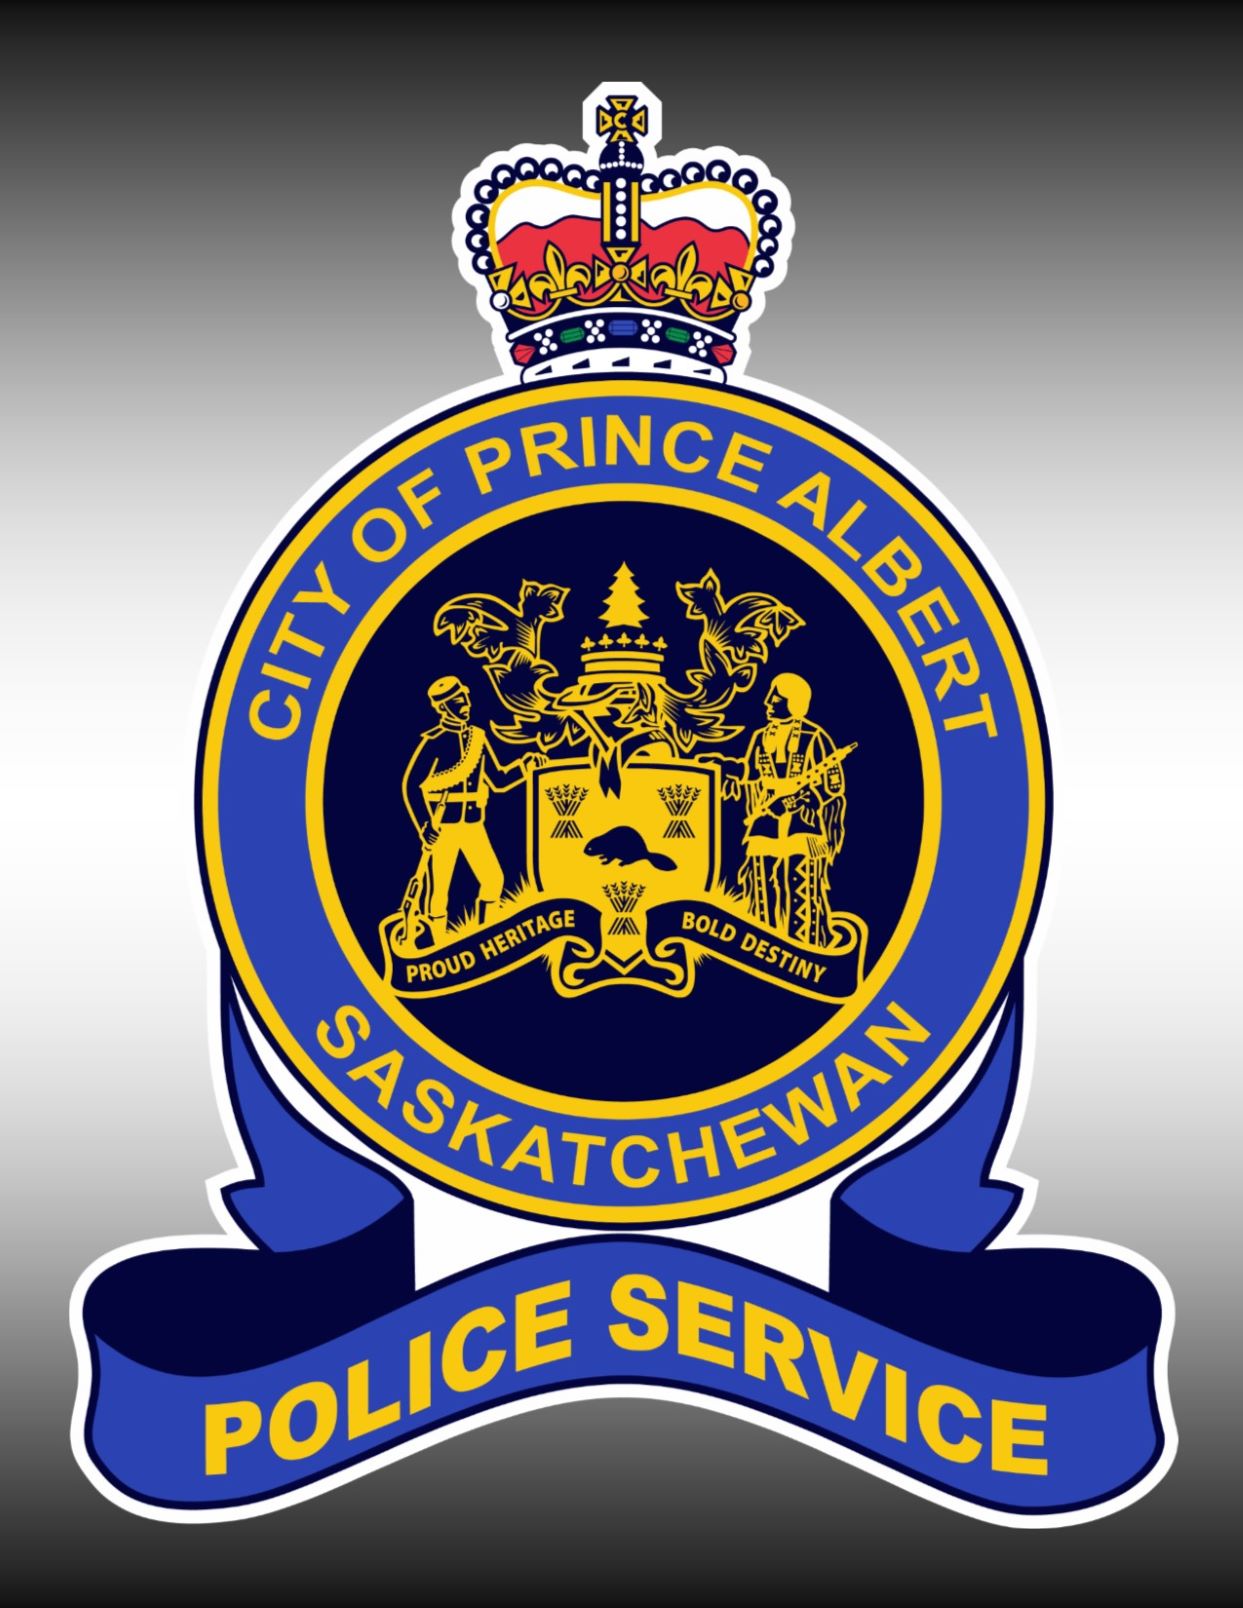 Media Release - Police Warning Public about Dangers of Confidence Scams Targeting the Elderly